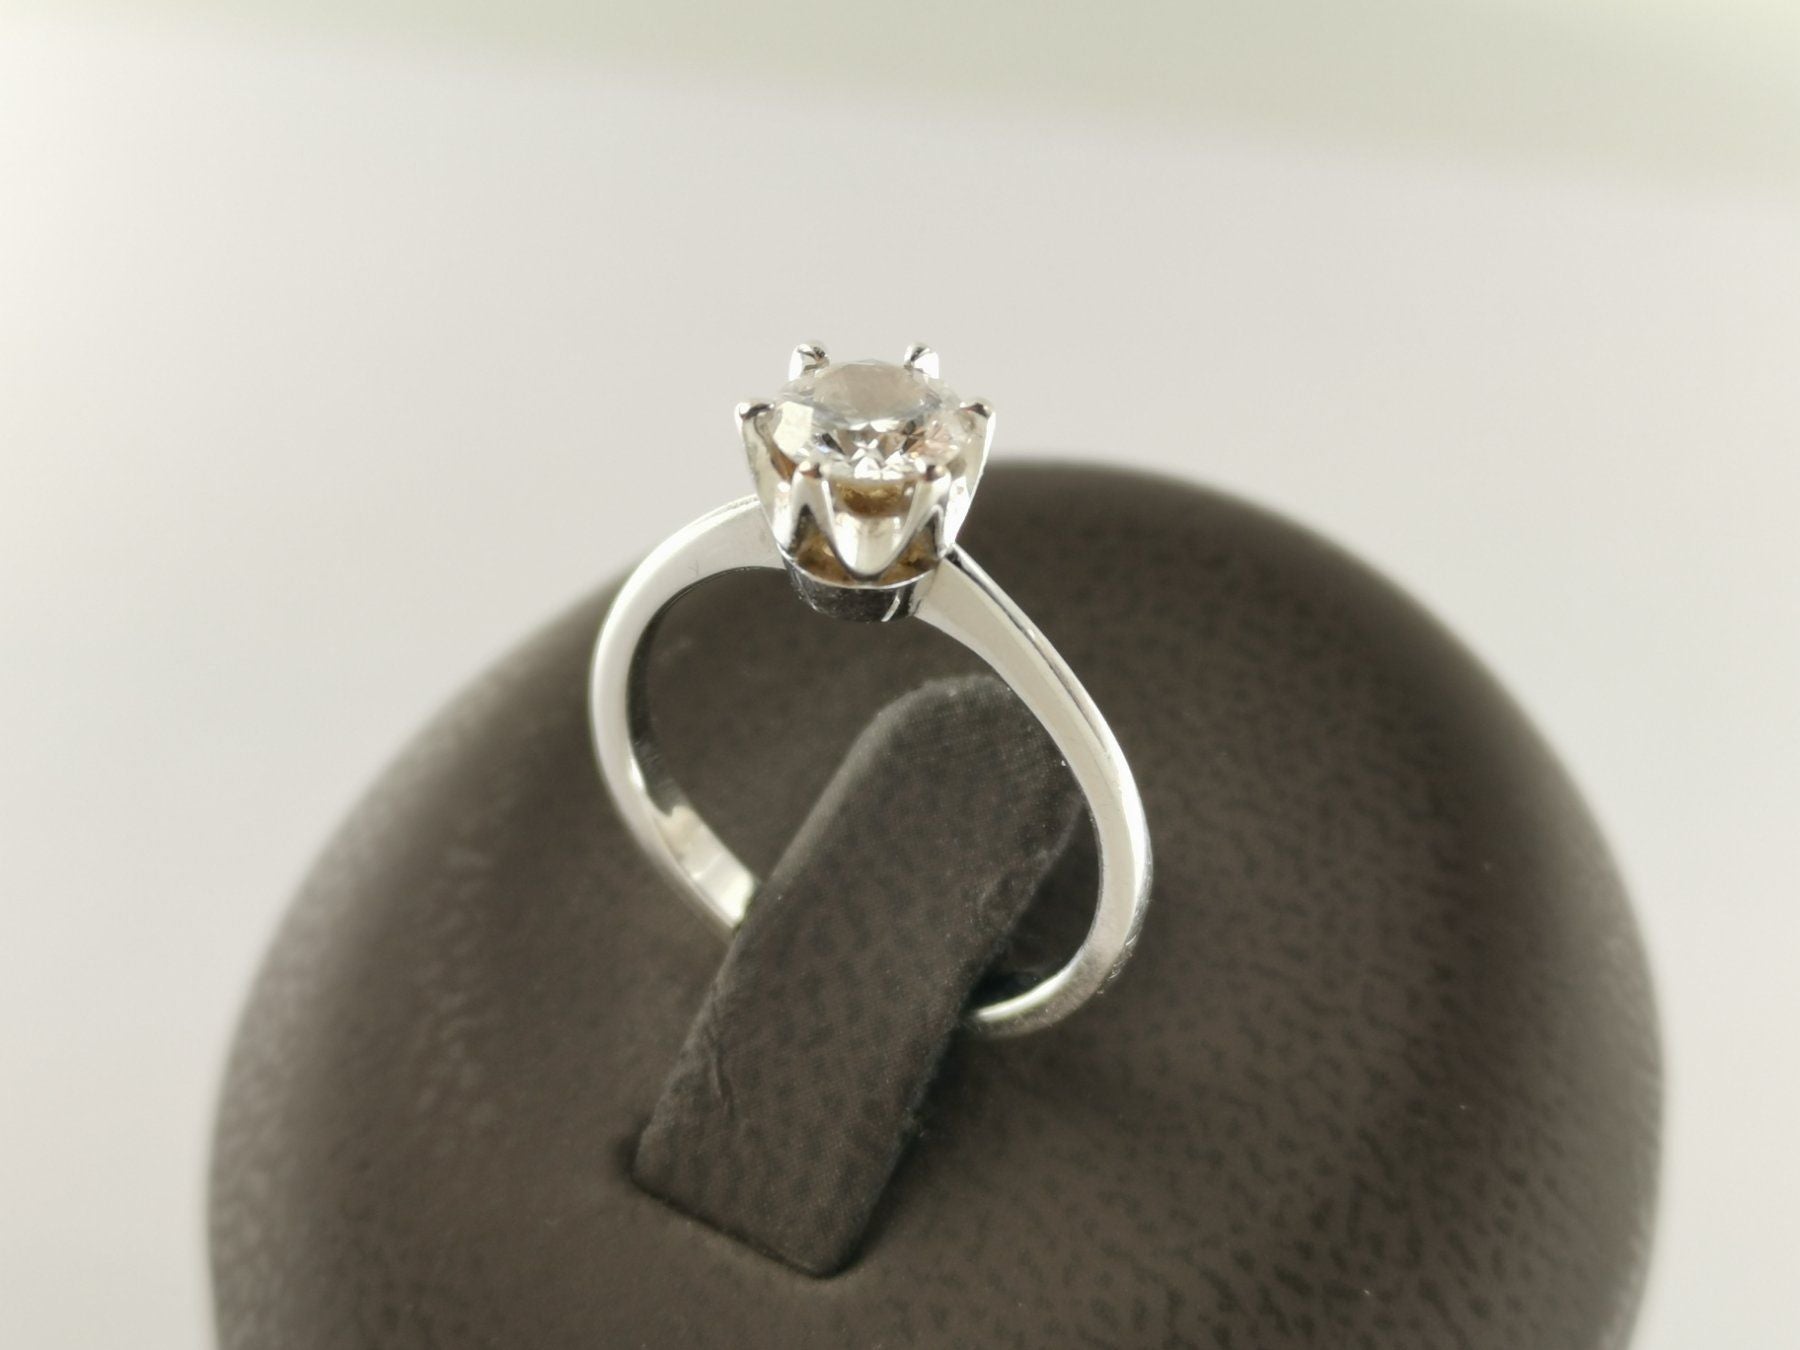 Solitaire-Ring 18K Weissgold 0,58ct. - RING05123